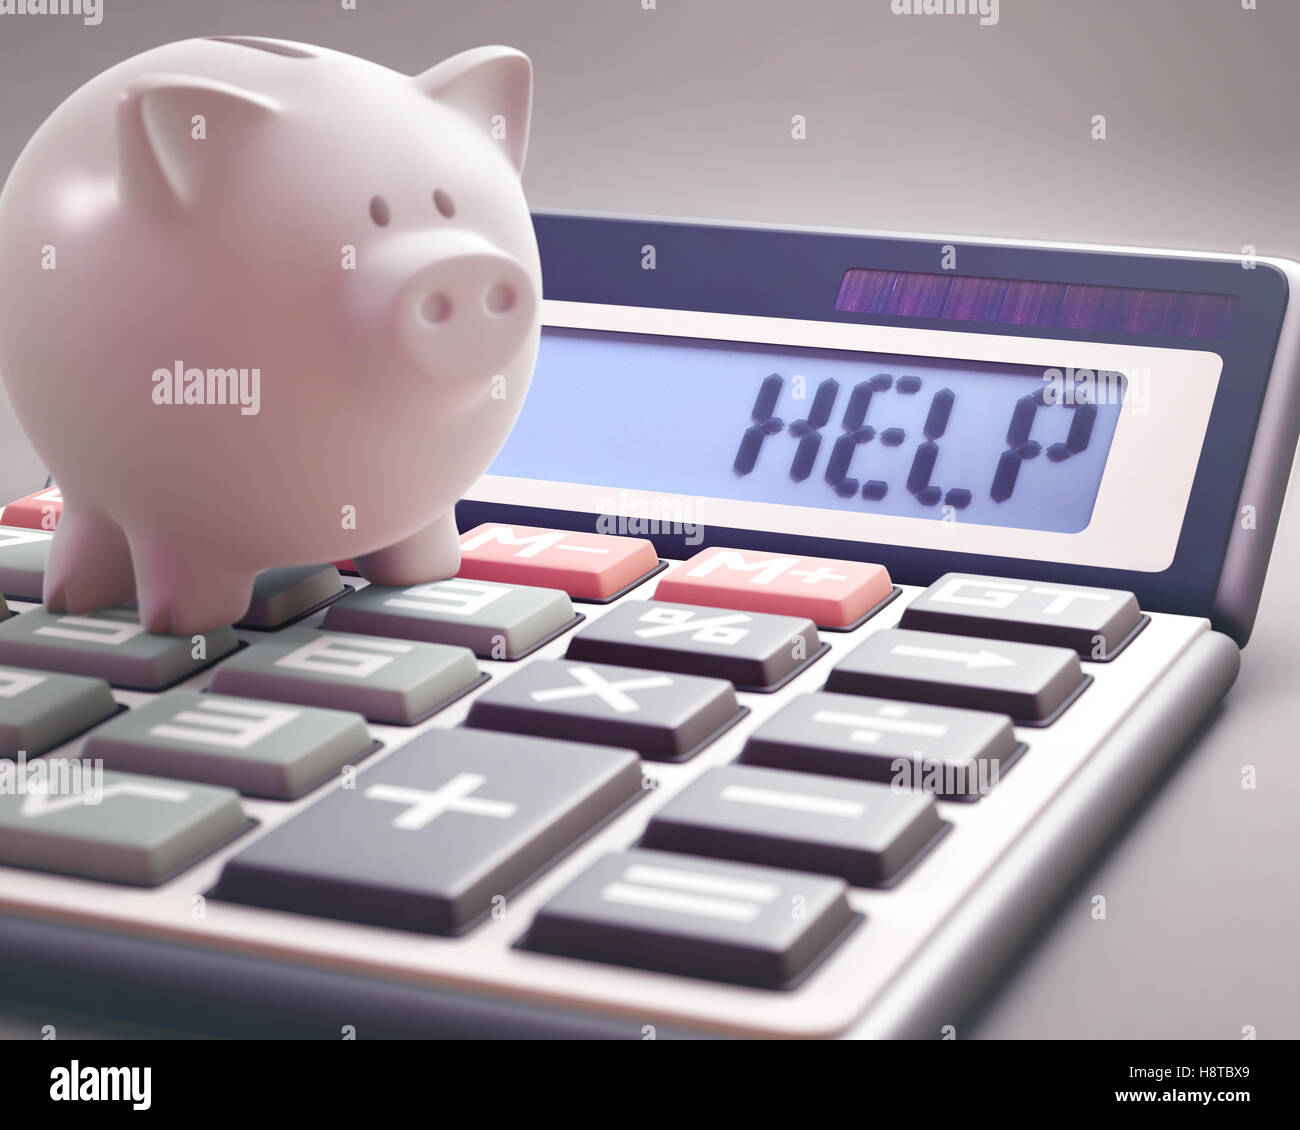 Piggy bank on a calculator that shows the word 'HELP' on the display. Stock Photo